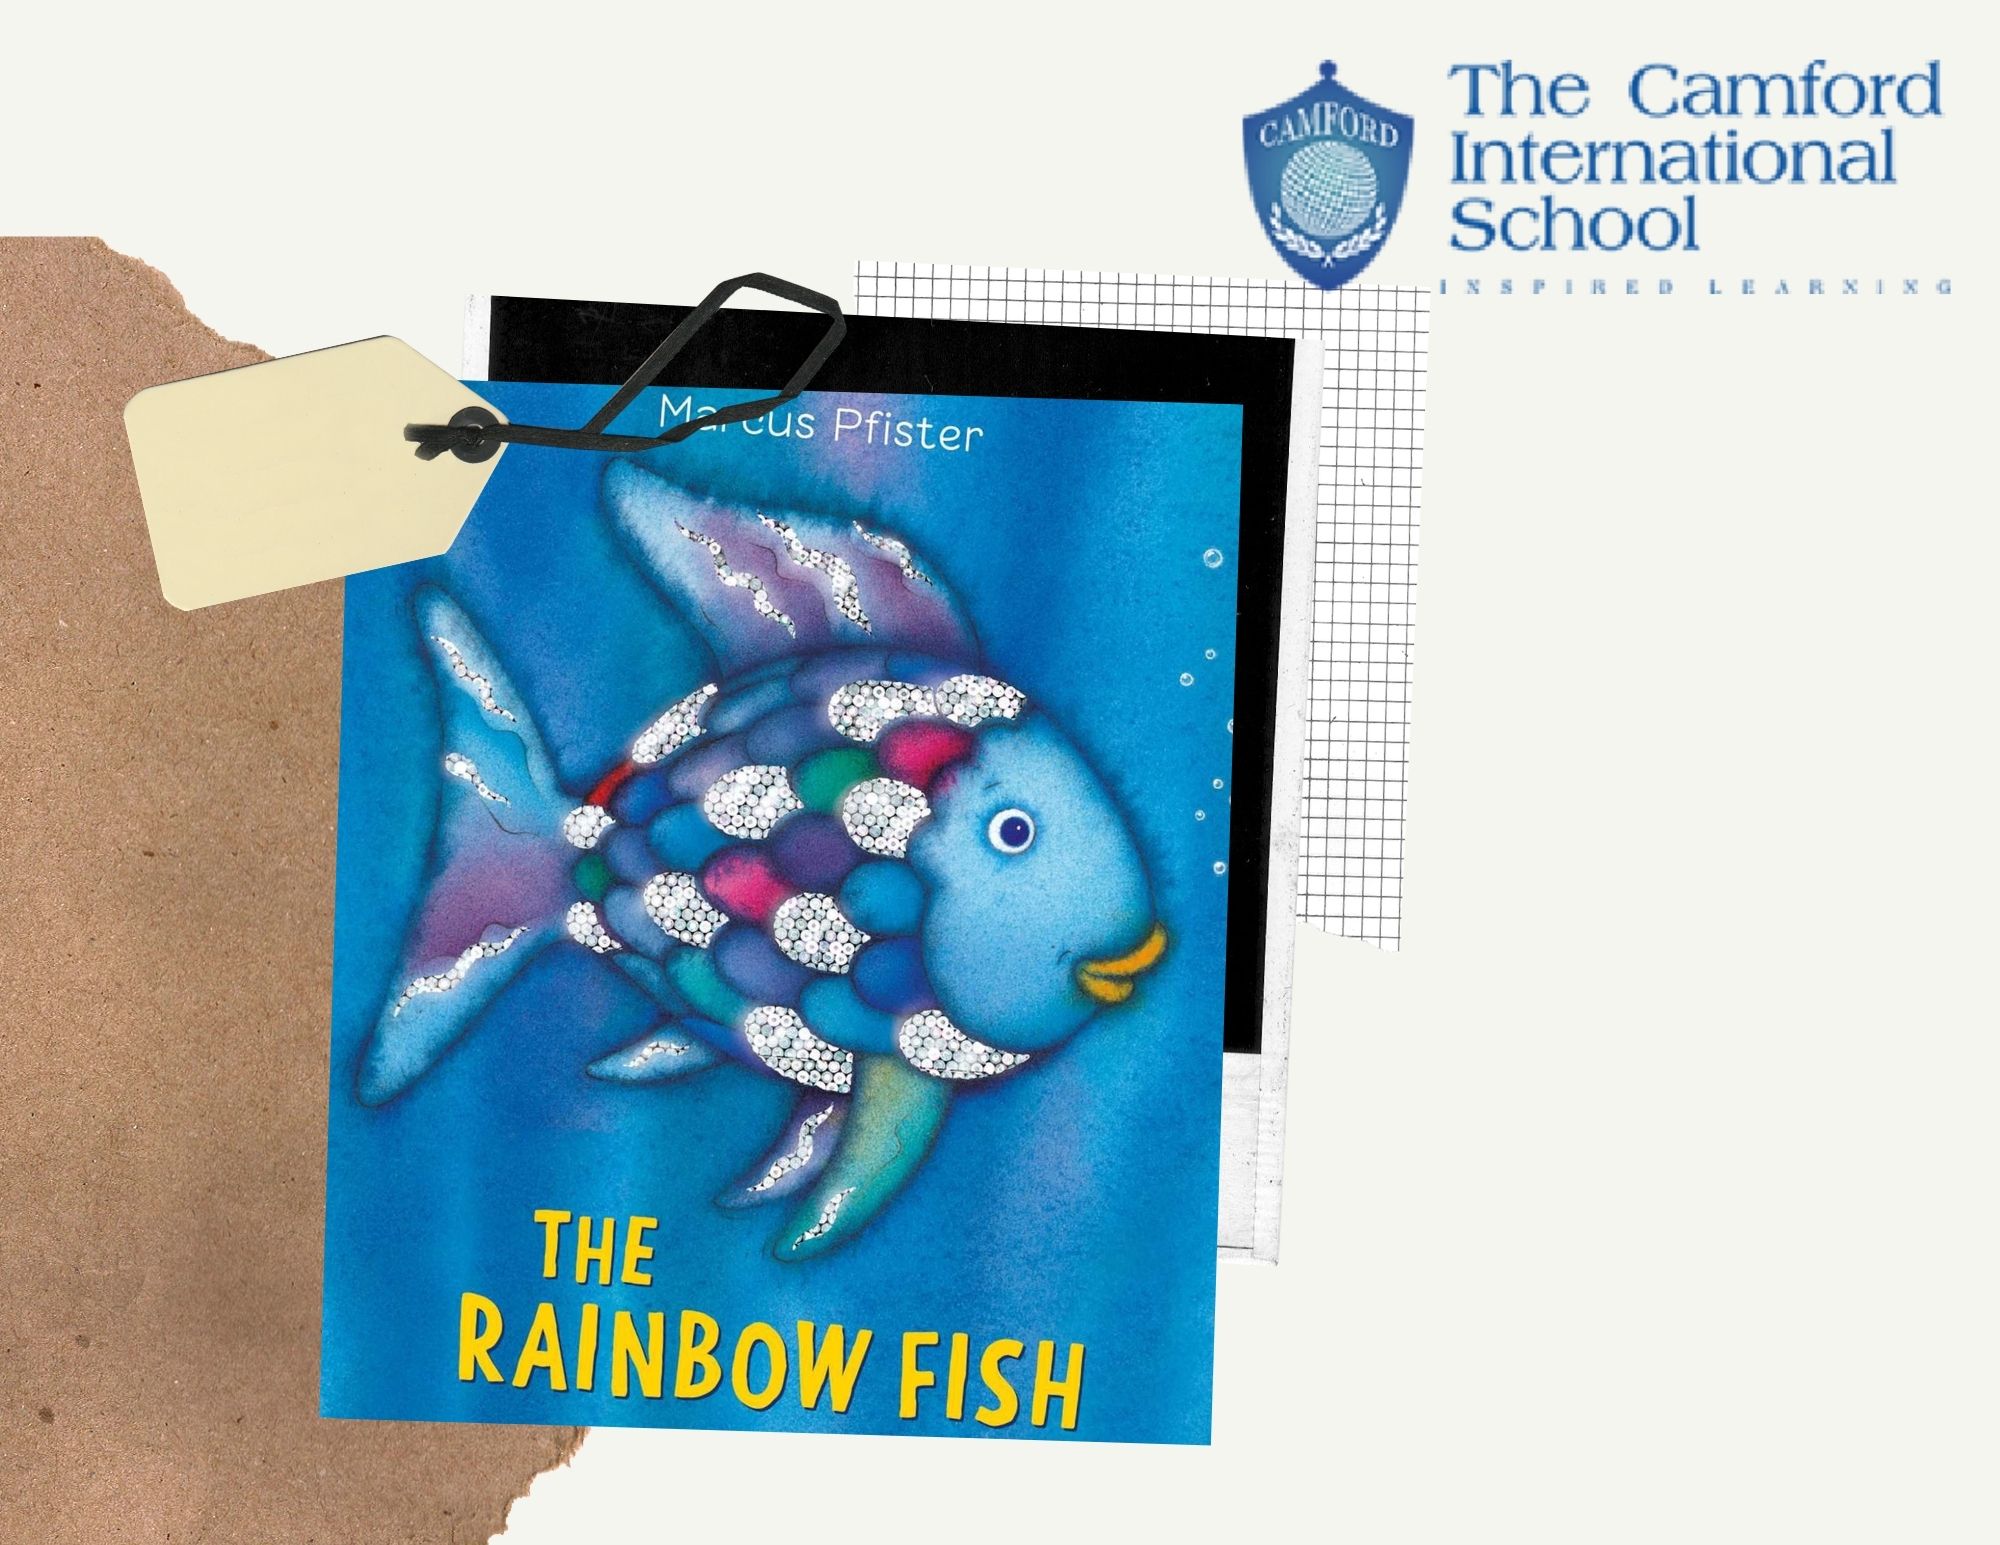 Southern Road Primary on X: After reading The Rainbow Fish